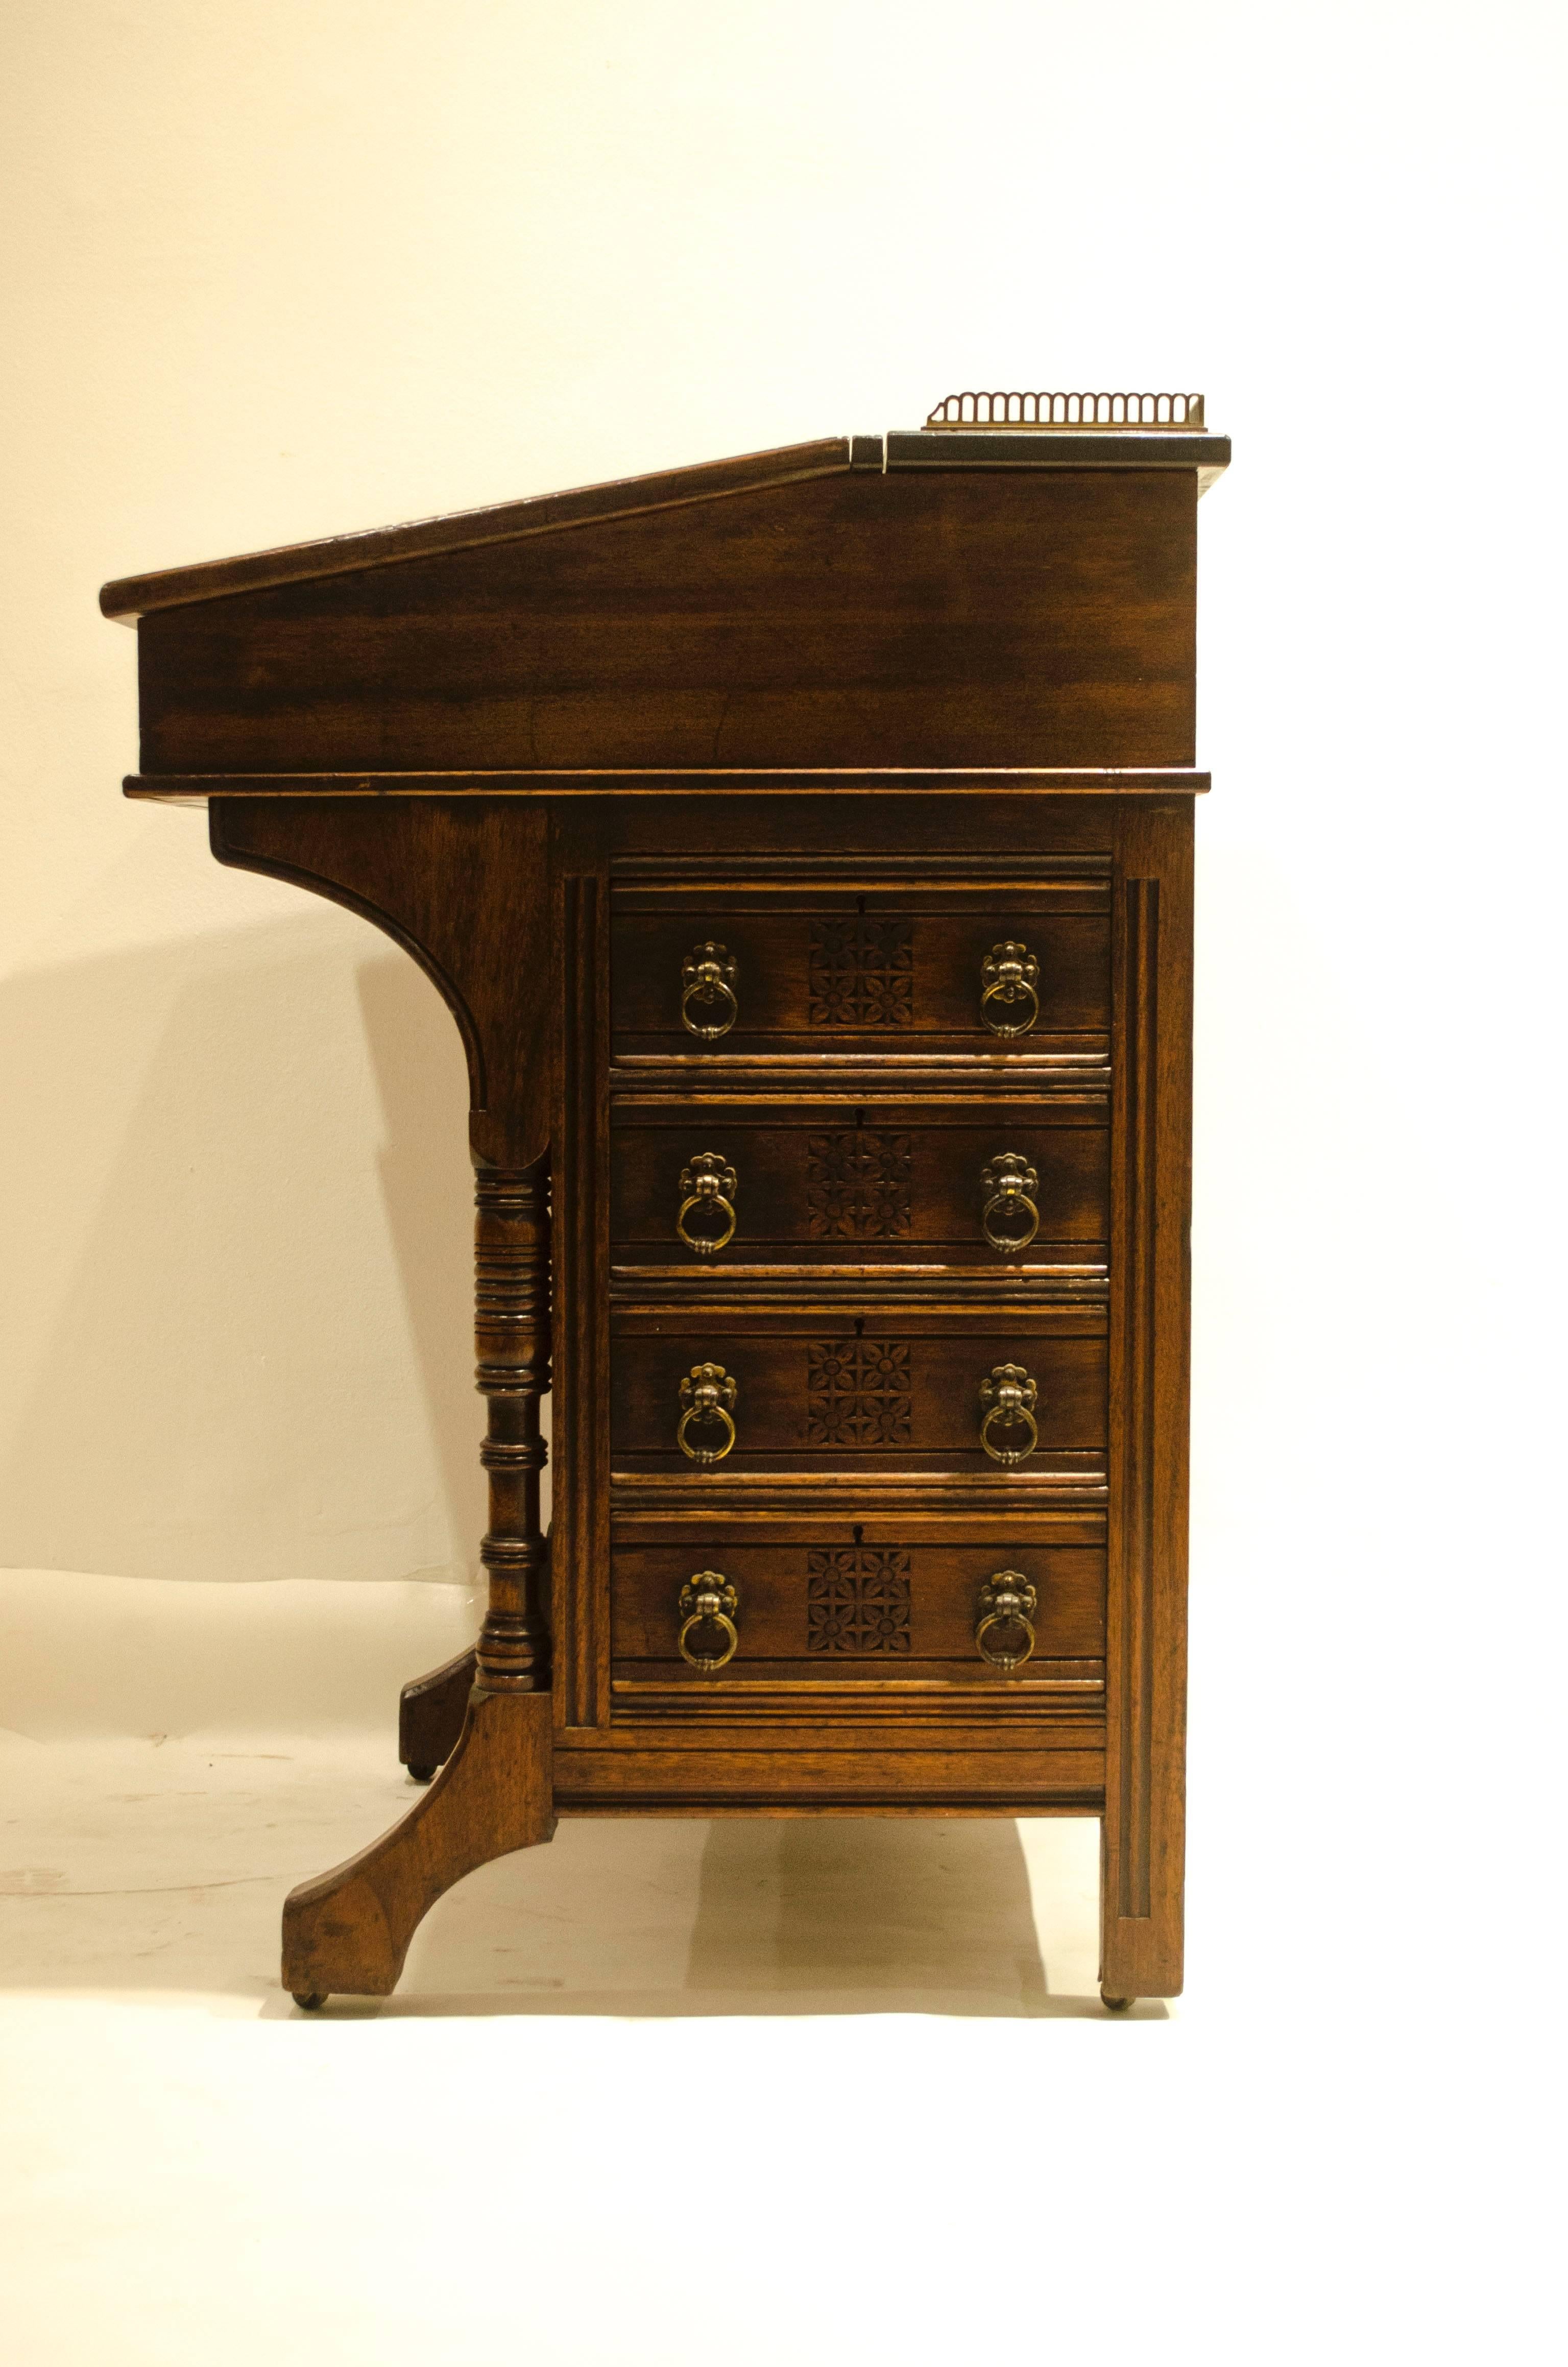 19th Century B Talbert for Gillows Aesthetic Movement Davenport with Central Carved Rosette For Sale